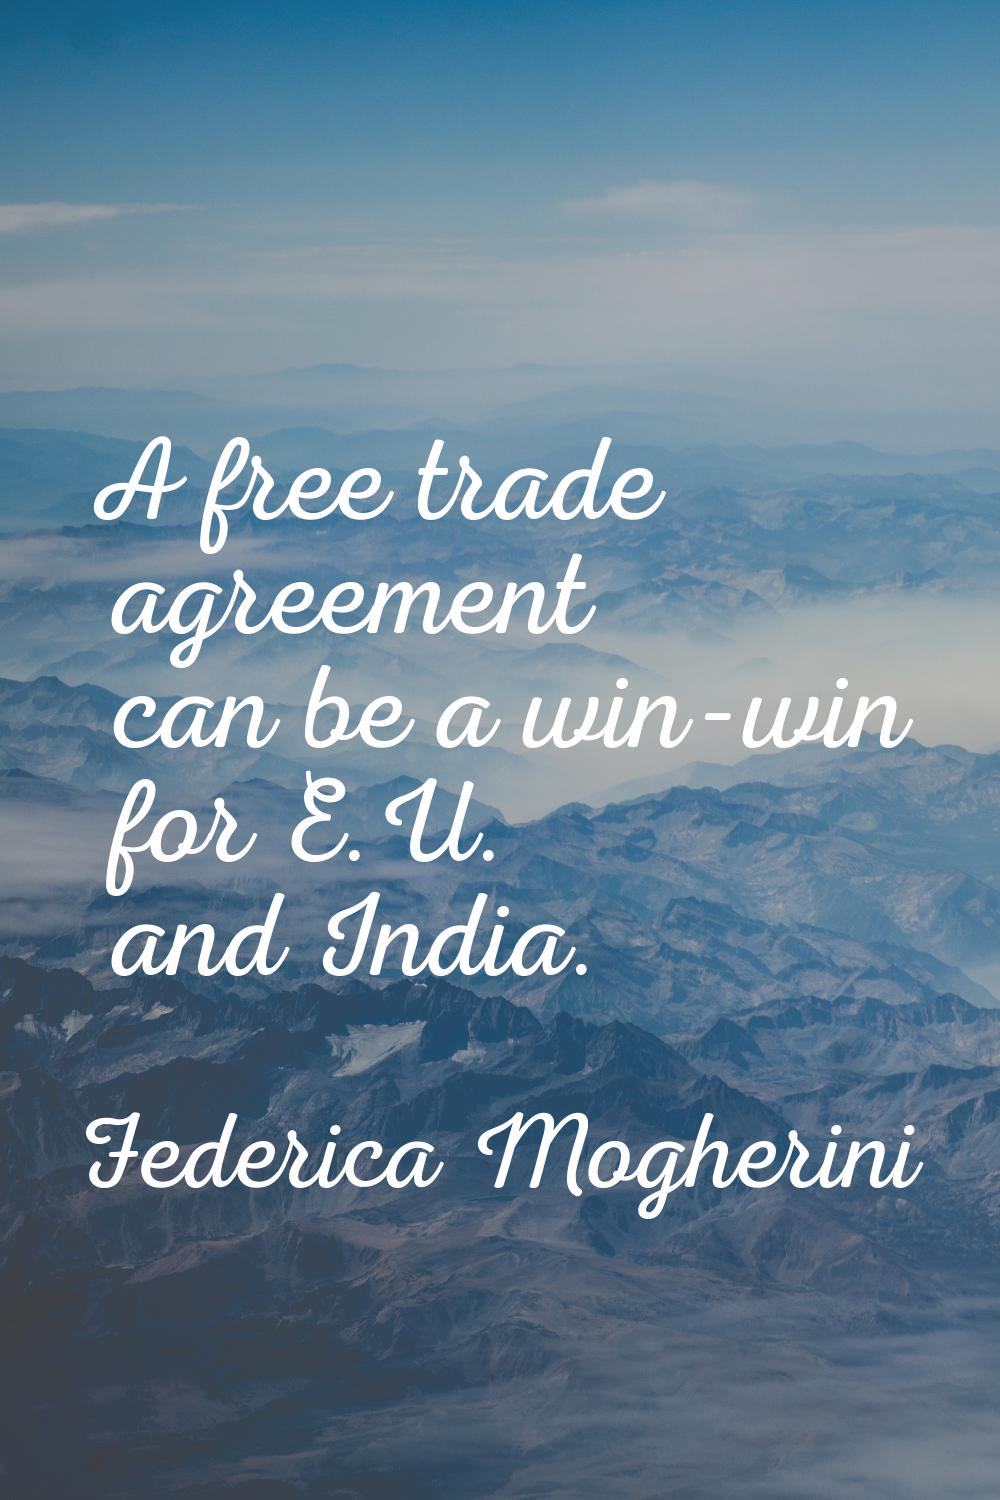 A free trade agreement can be a win-win for E.U. and India.